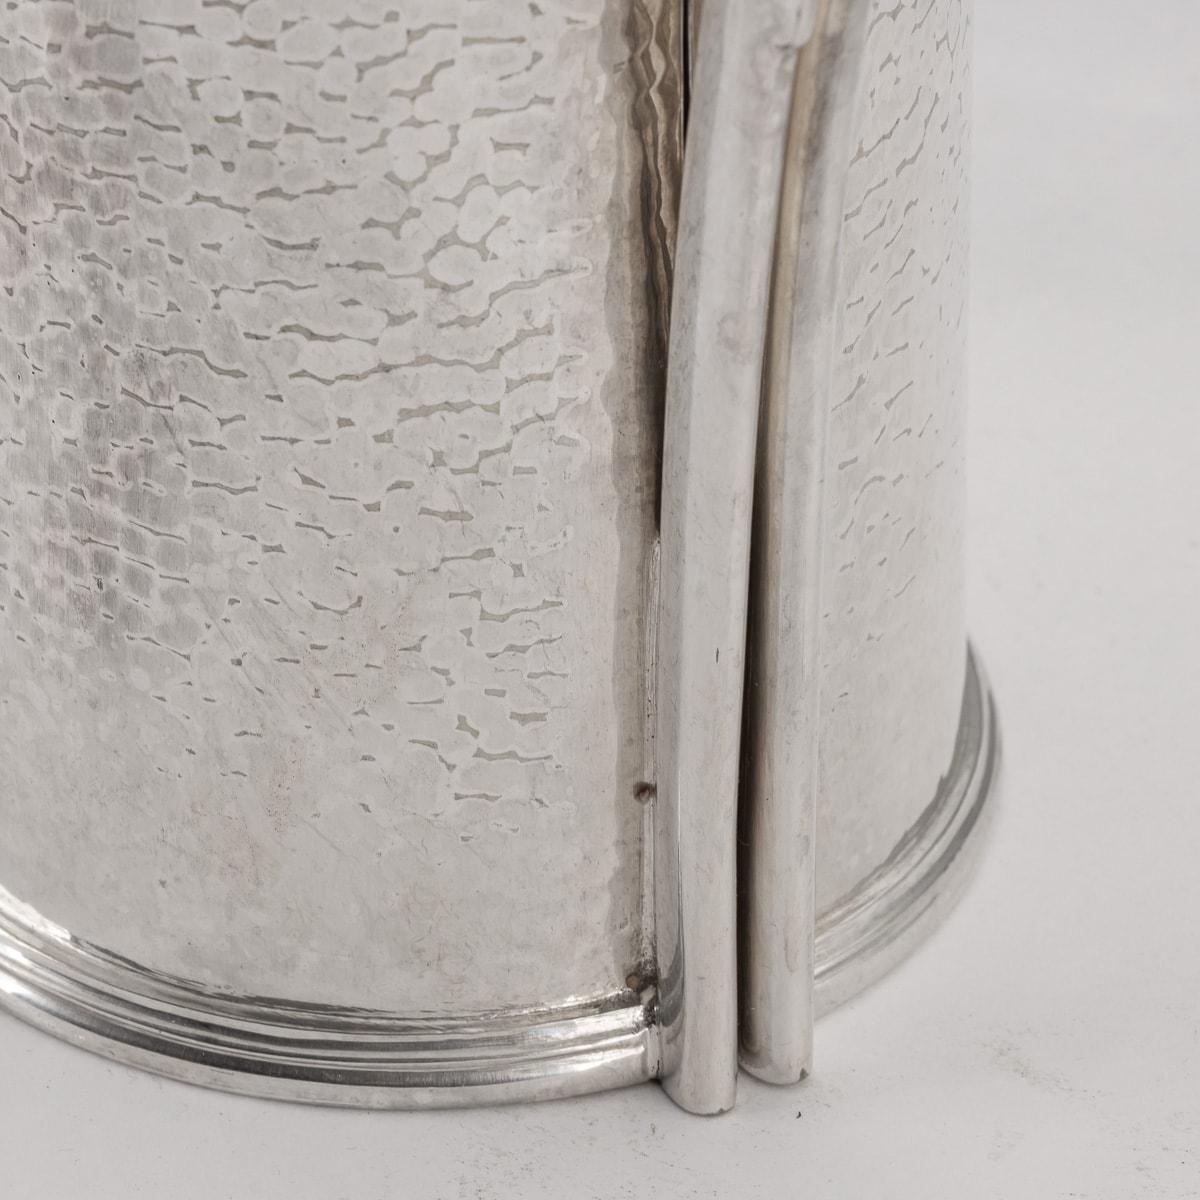 20th Century English Silver Plate Bottle Holder By Mappin & Webb, c.1930 For Sale 1